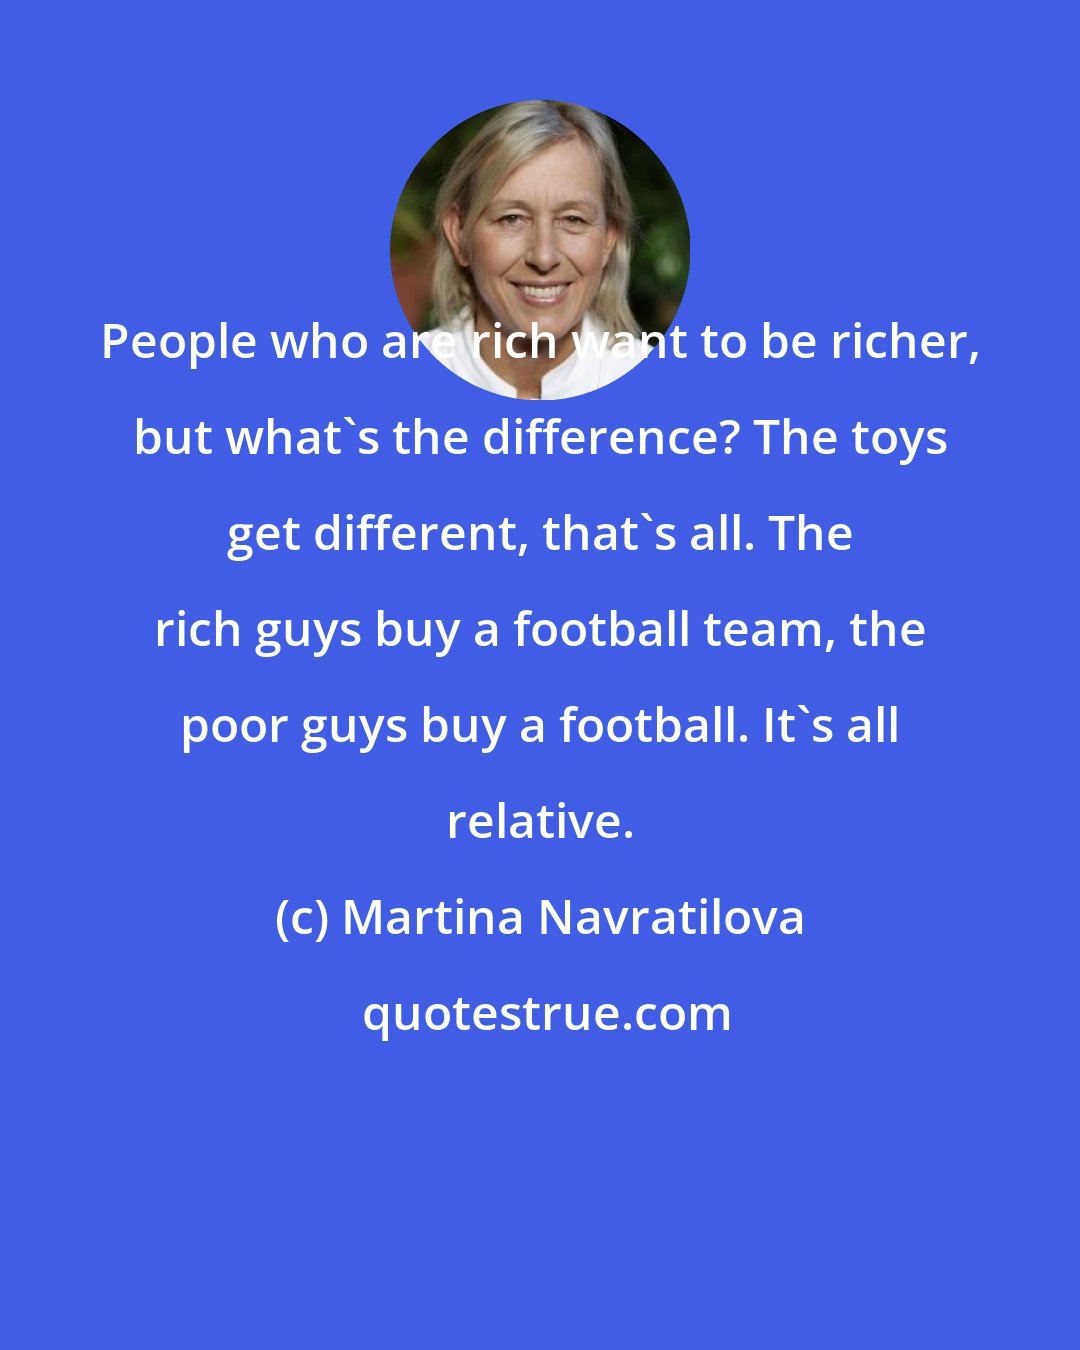 Martina Navratilova: People who are rich want to be richer, but what's the difference? The toys get different, that's all. The rich guys buy a football team, the poor guys buy a football. It's all relative.